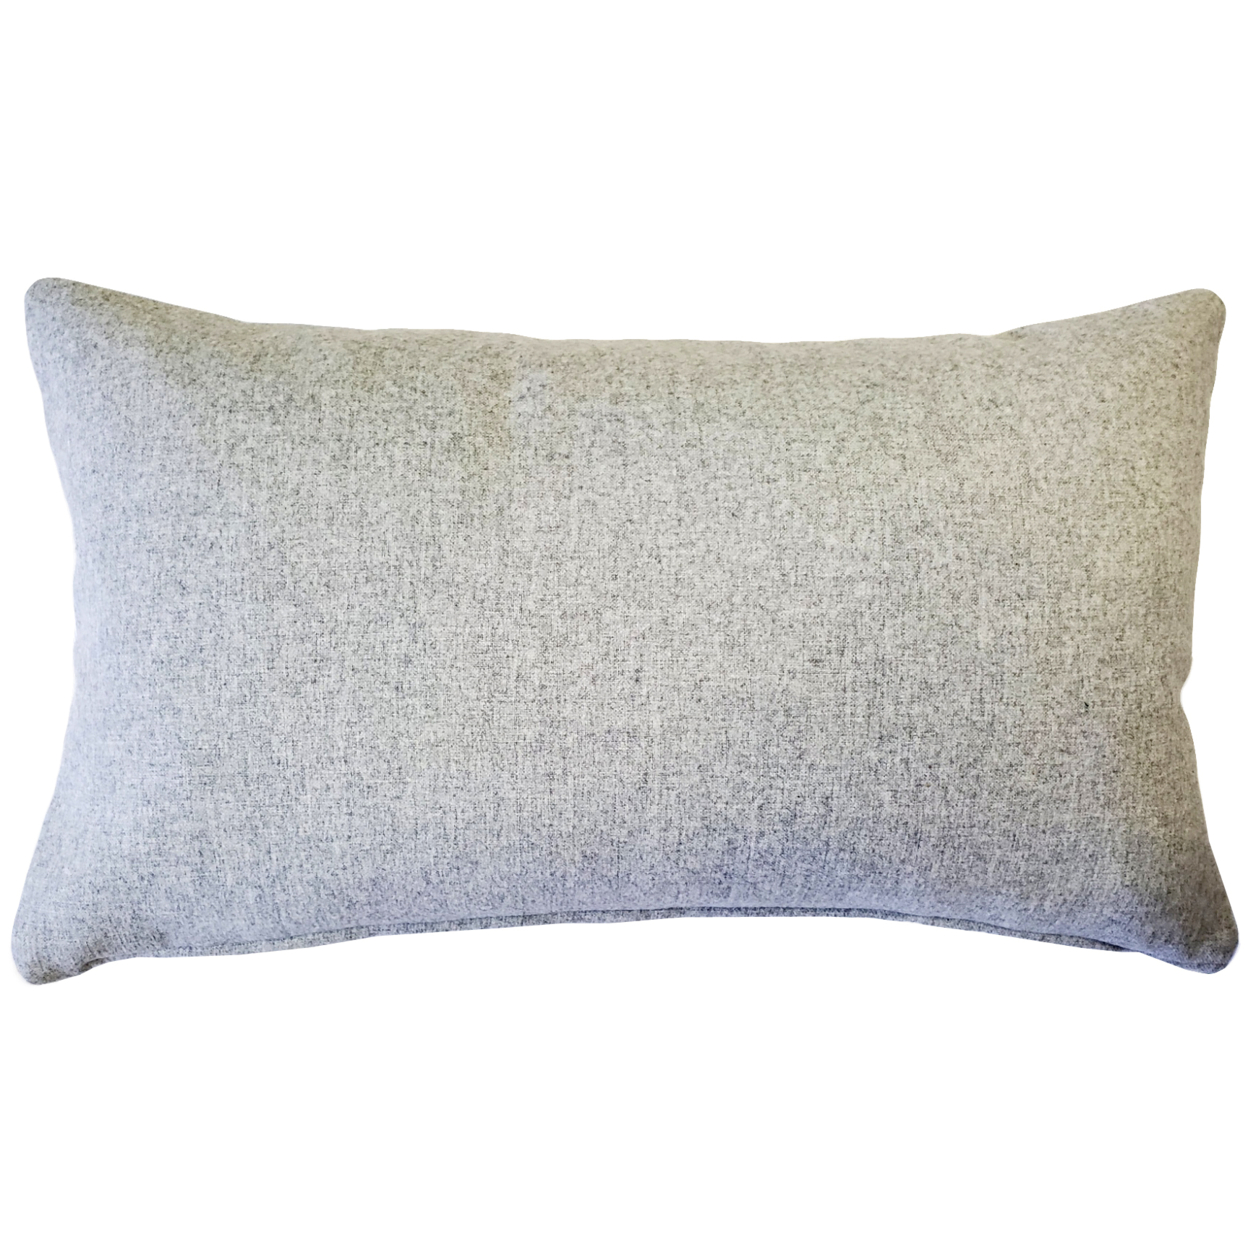 Lake Tahoe Gray Felt Coordinates Pillow 12x19 Inches Square, Complete Pillow With Polyfill Pillow Insert